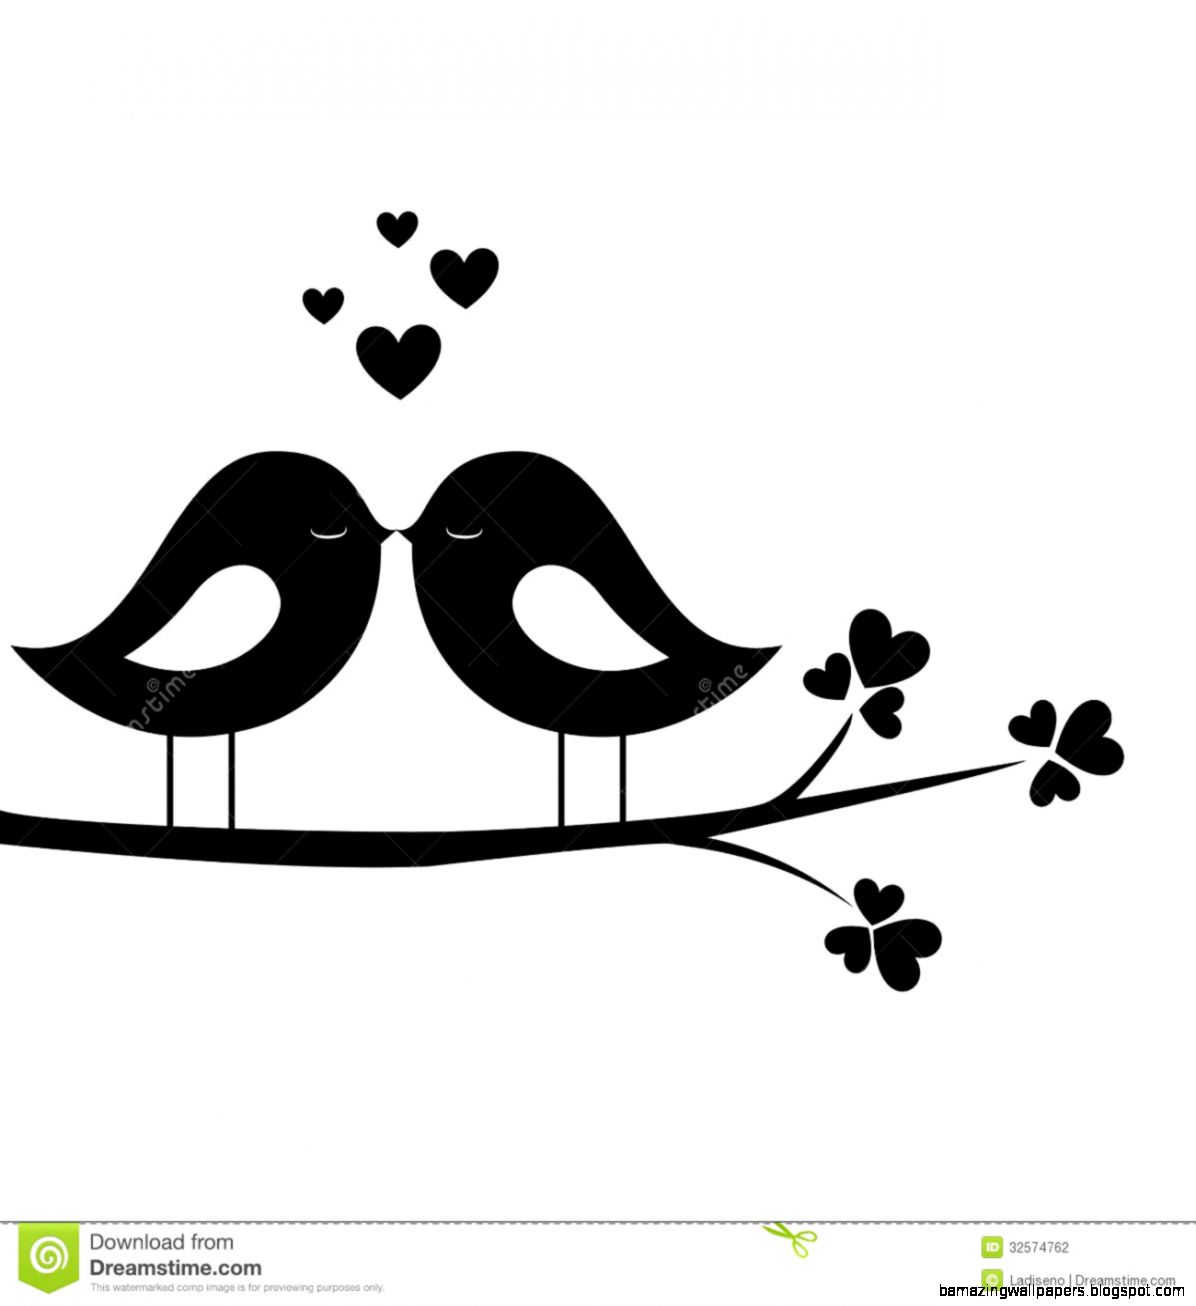 Lovebird clipart #5, Download drawings